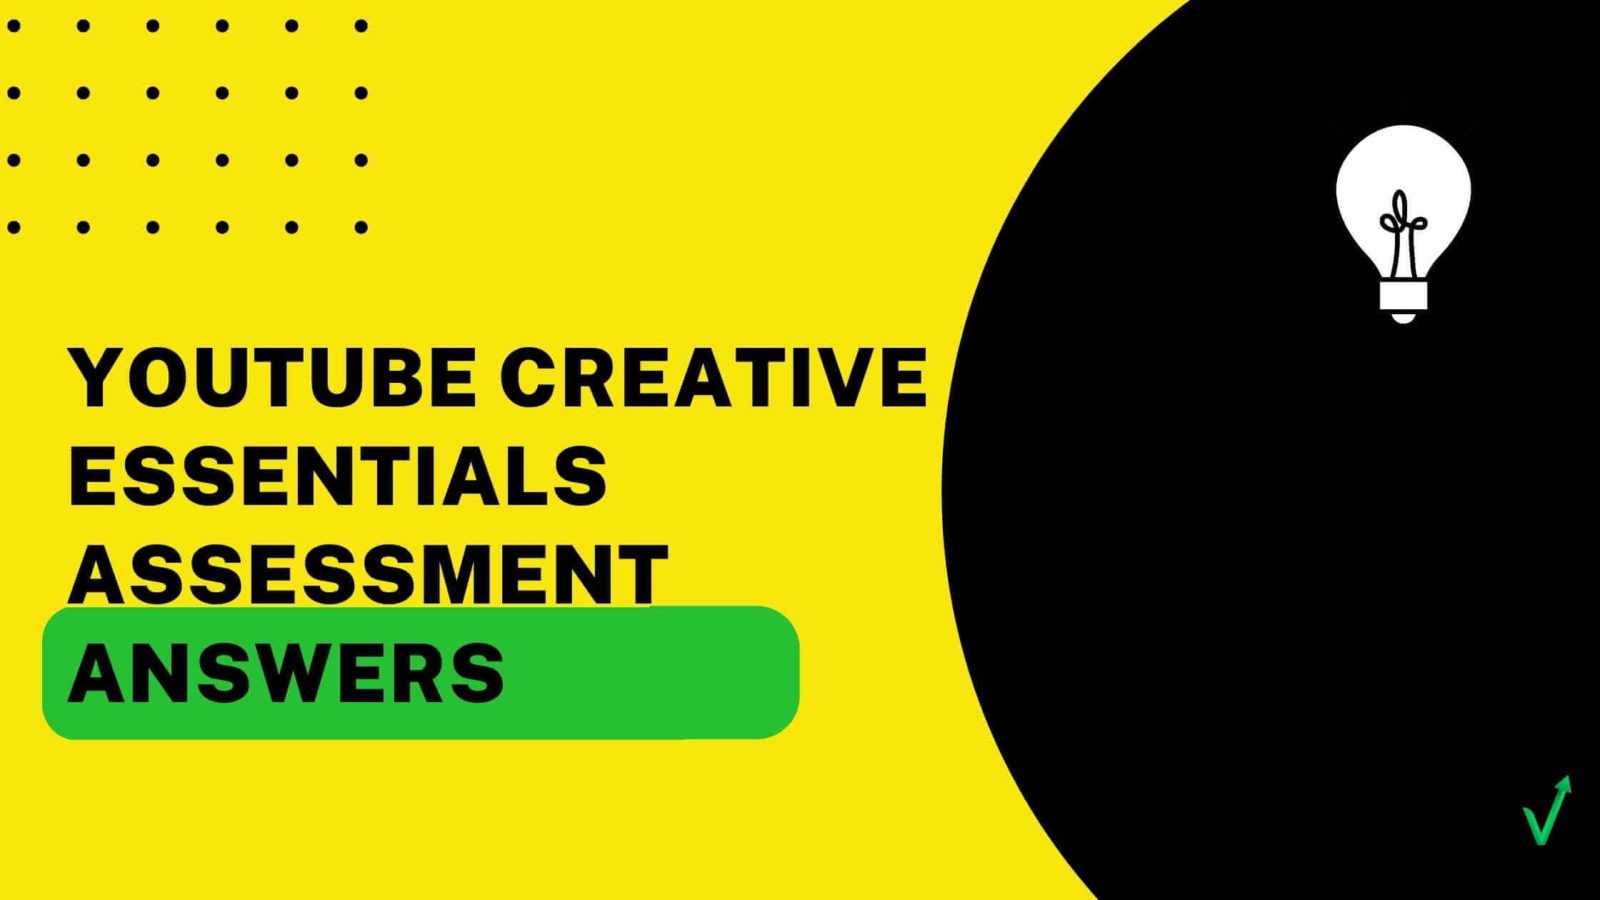 YouTube Creative Essentials Assessment Answers